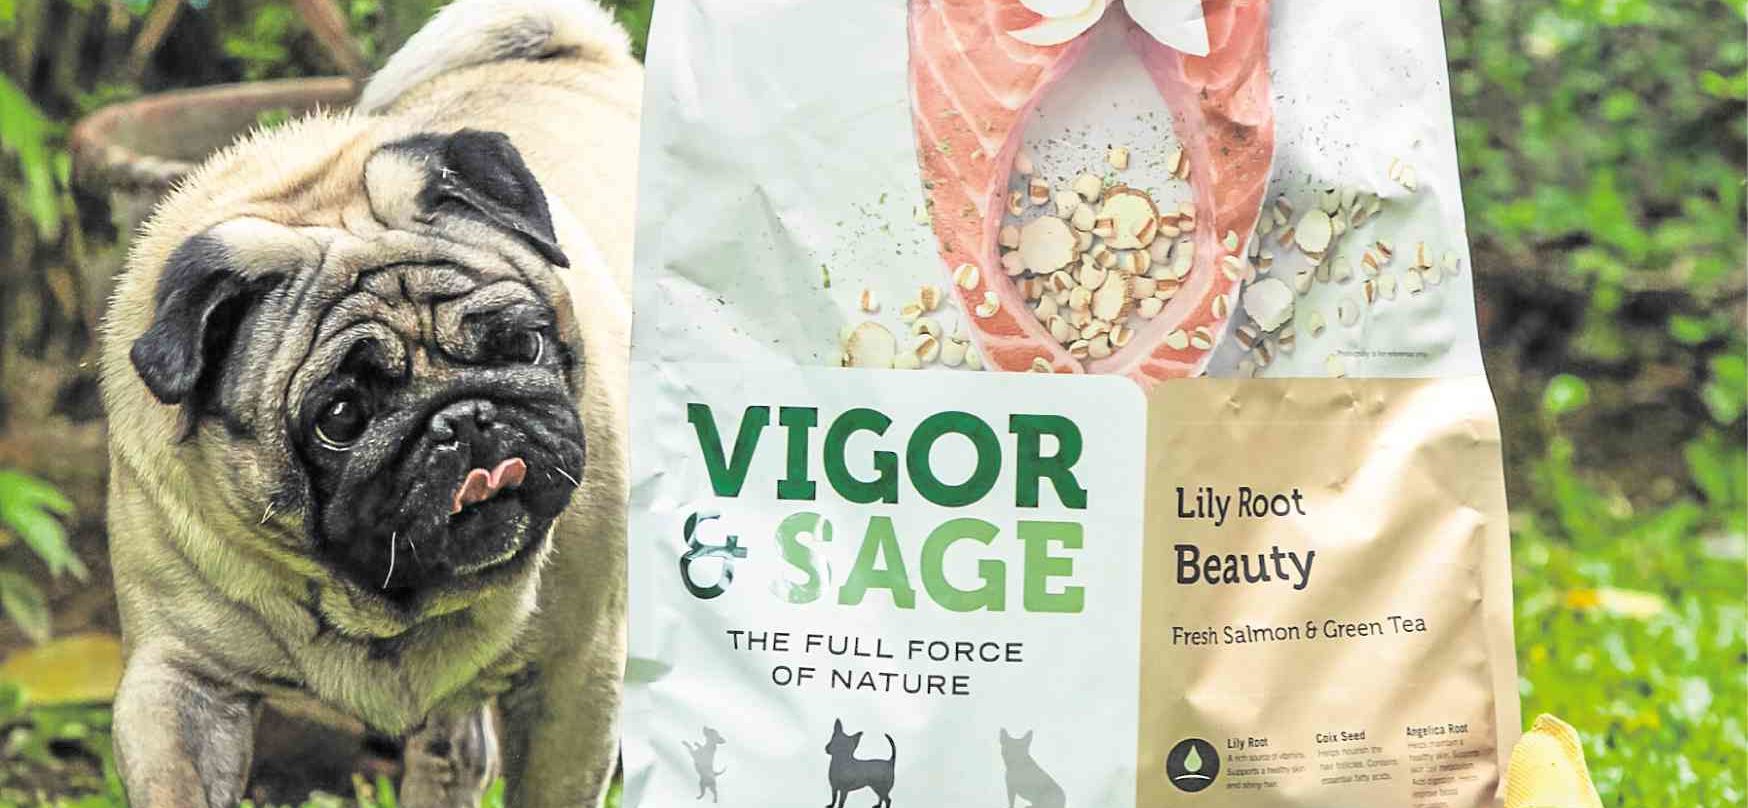 New dog food line offers ‘fine dining with herbs’